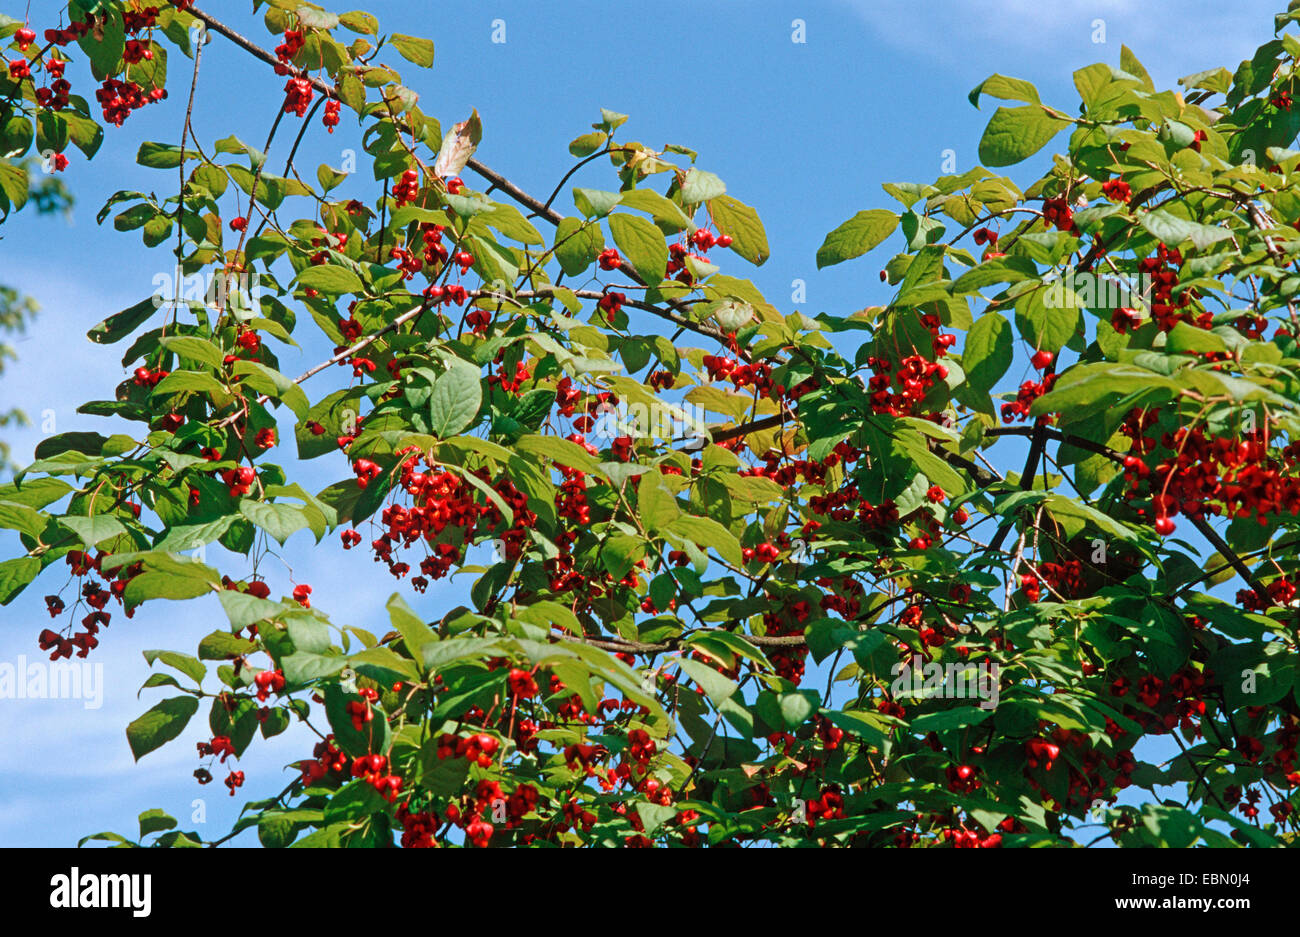 Dingle dangle tree (Euonymus planipes), branches with fruits Stock Photo